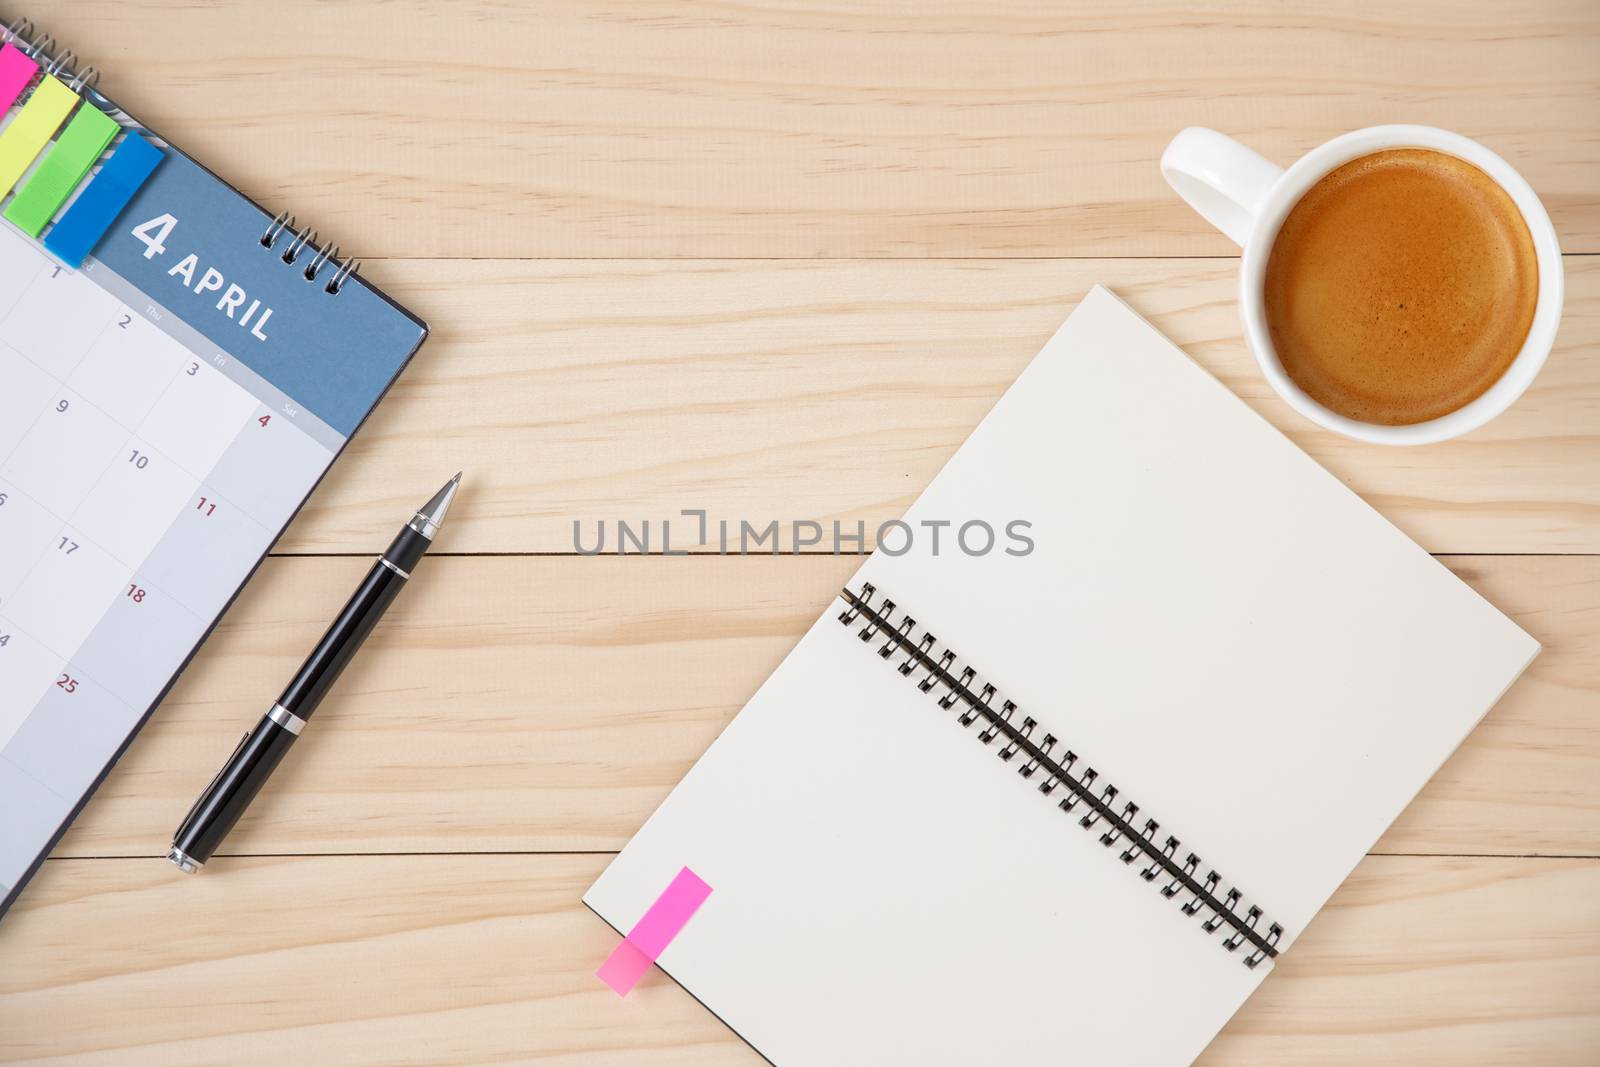 A blank notebook, a calendar, and a cup of coffee in white ceramic cup. Wooden background.